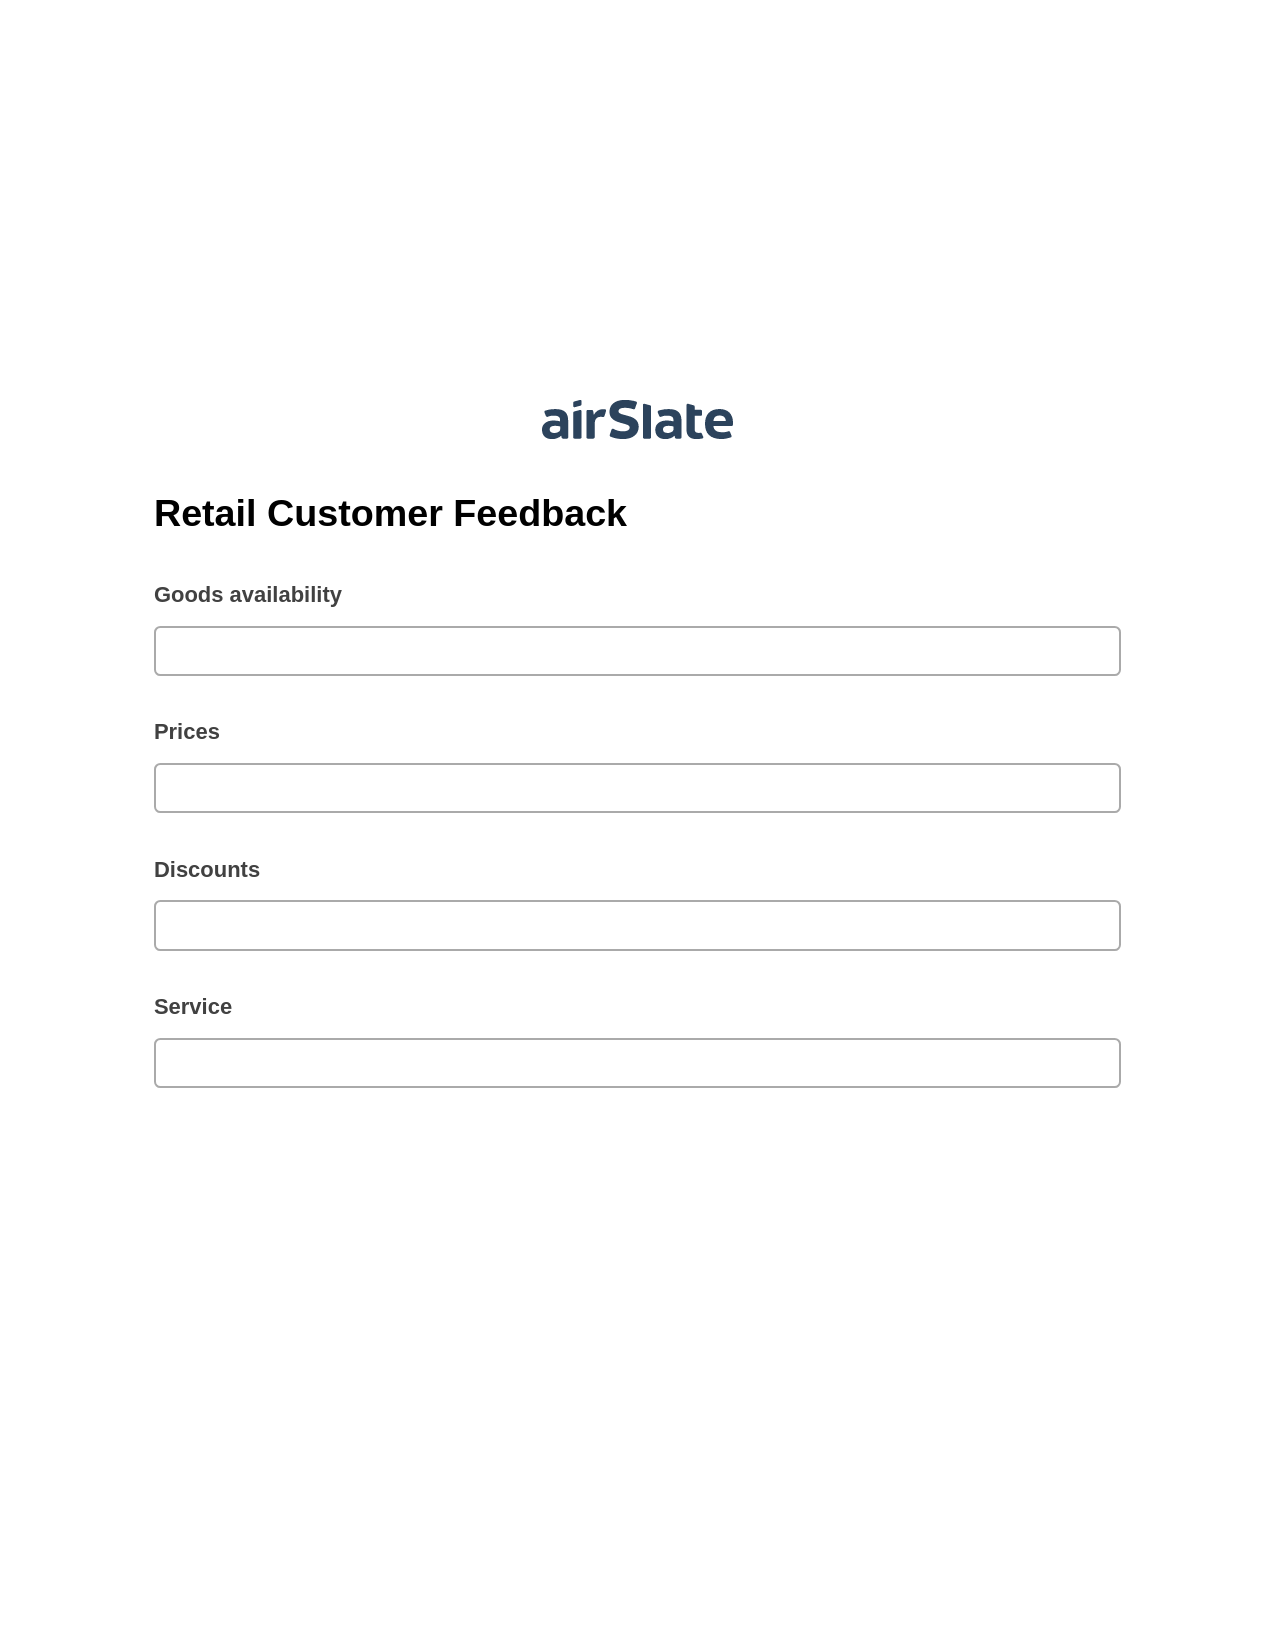 Retail Customer Feedback Pre-fill from CSV File Bot, Update NetSuite Records Bot, Post-finish Document Bot